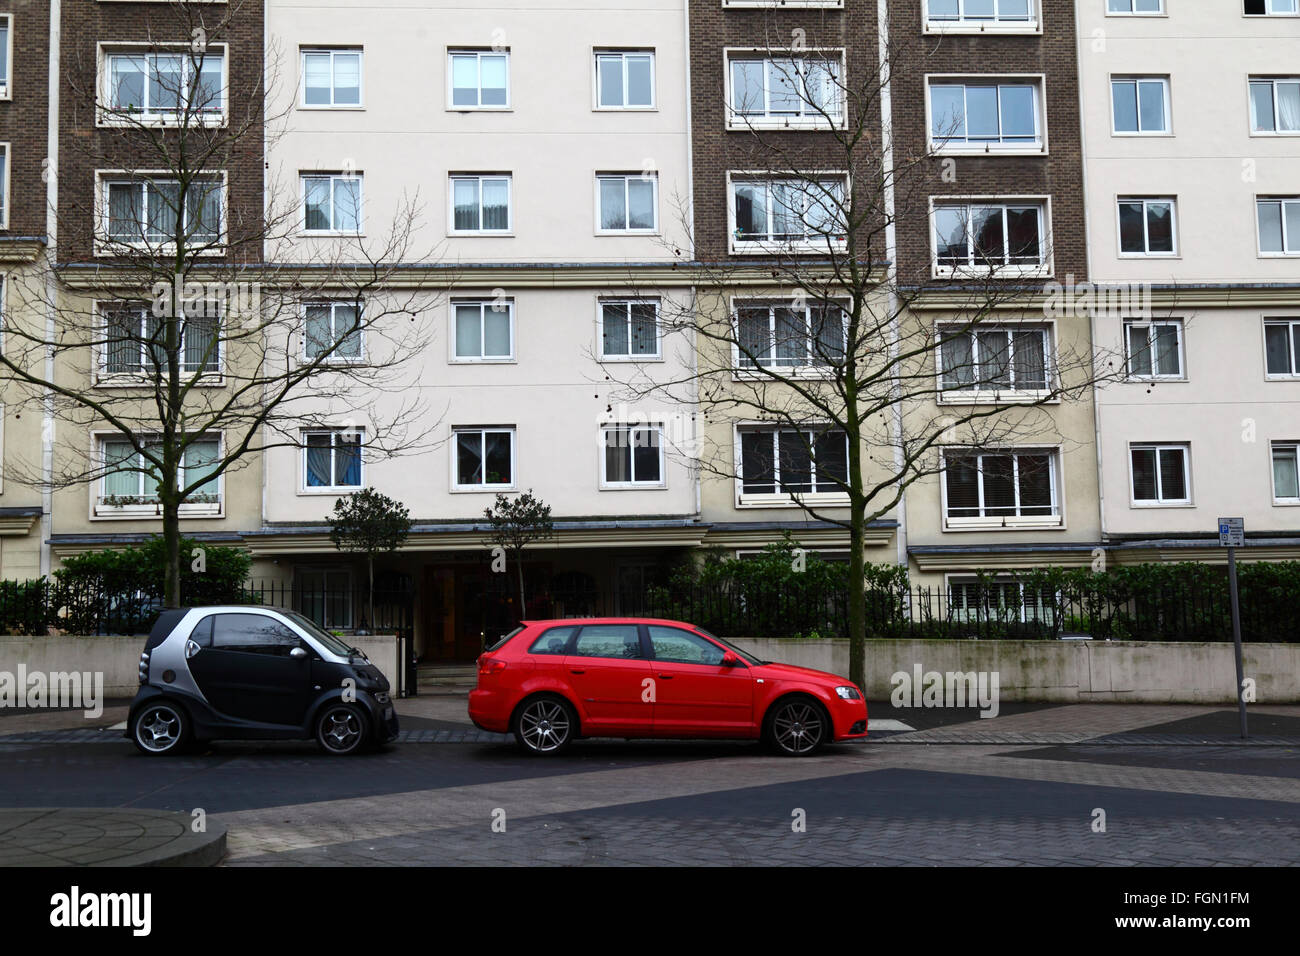 Small economy subcompact city car parked next to BMW outside flats in Exhibition Road, Kensington, London, England Stock Photo